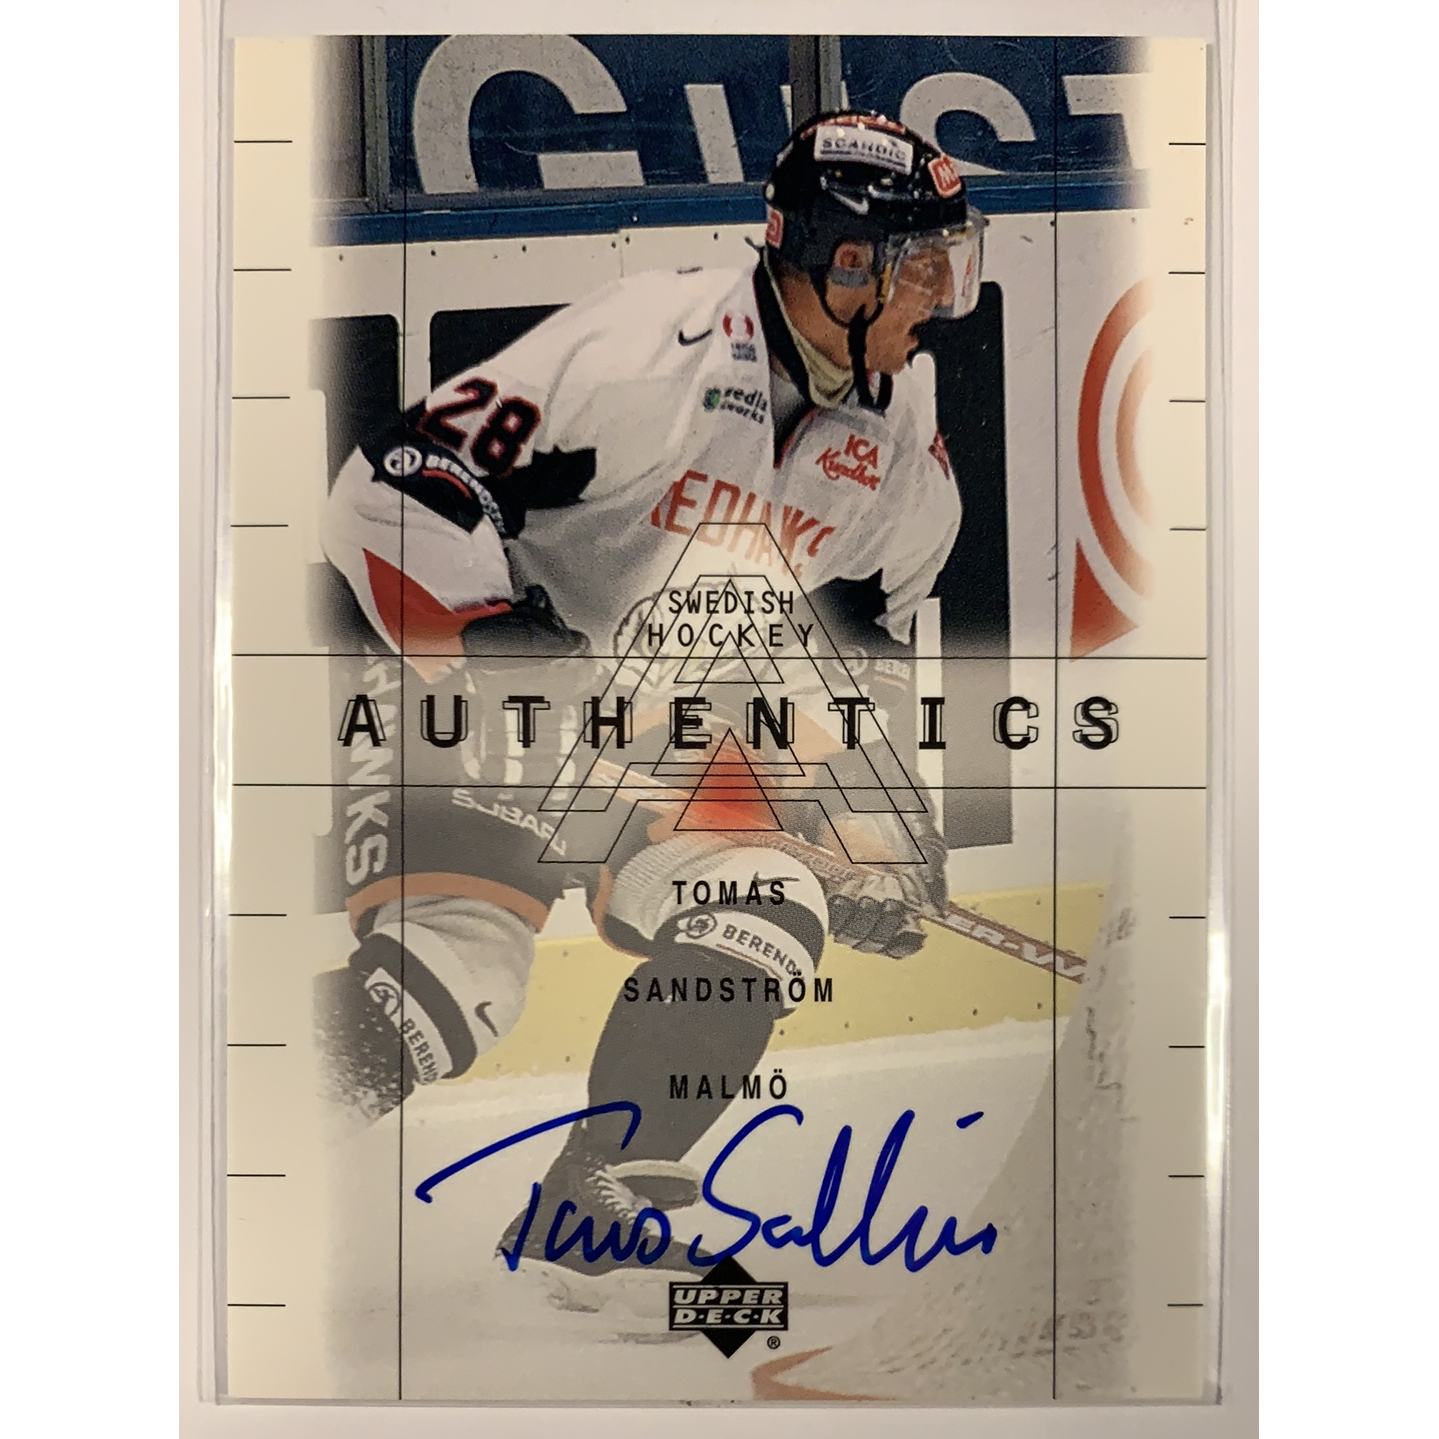  2000-01 Upper Deck Swedish Authentics Tomas Sandstrom On Card Auto  Local Legends Cards & Collectibles